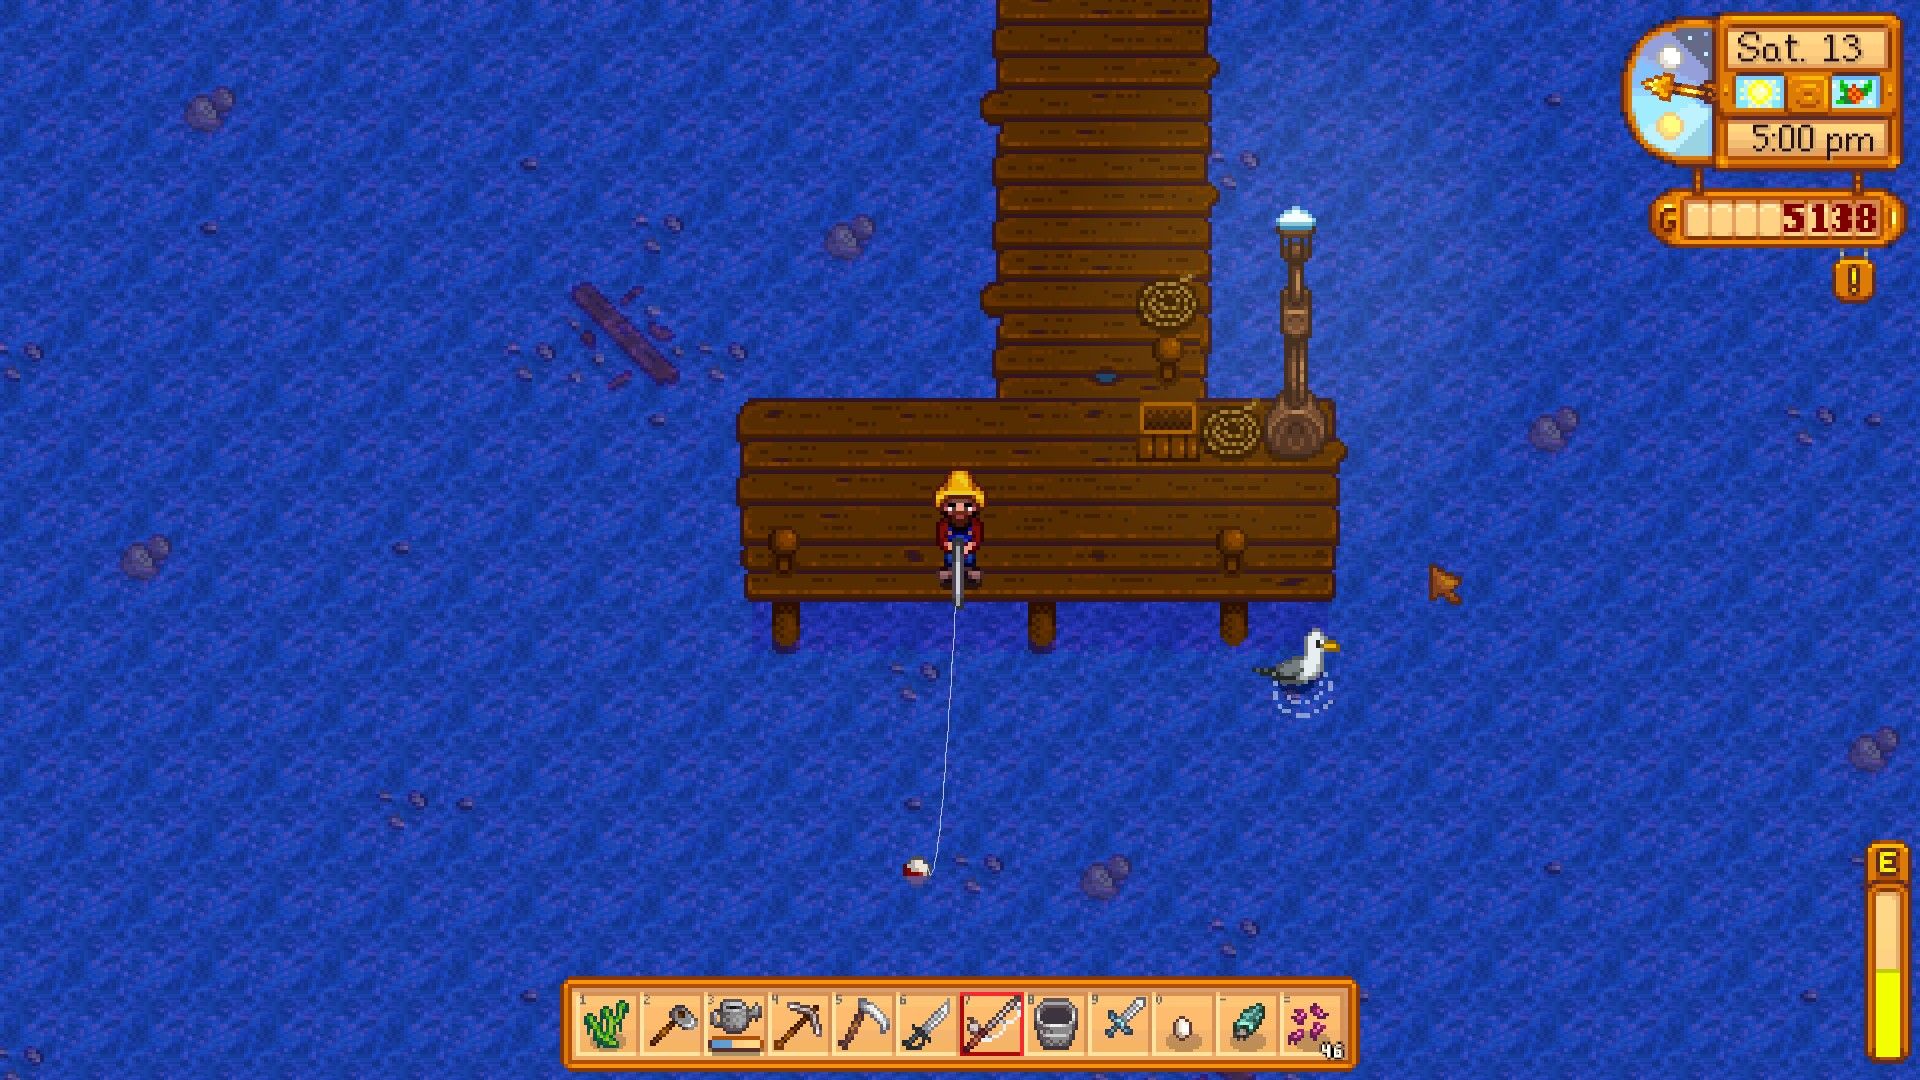 Stardew Valley: All You Need to Know About Fishing